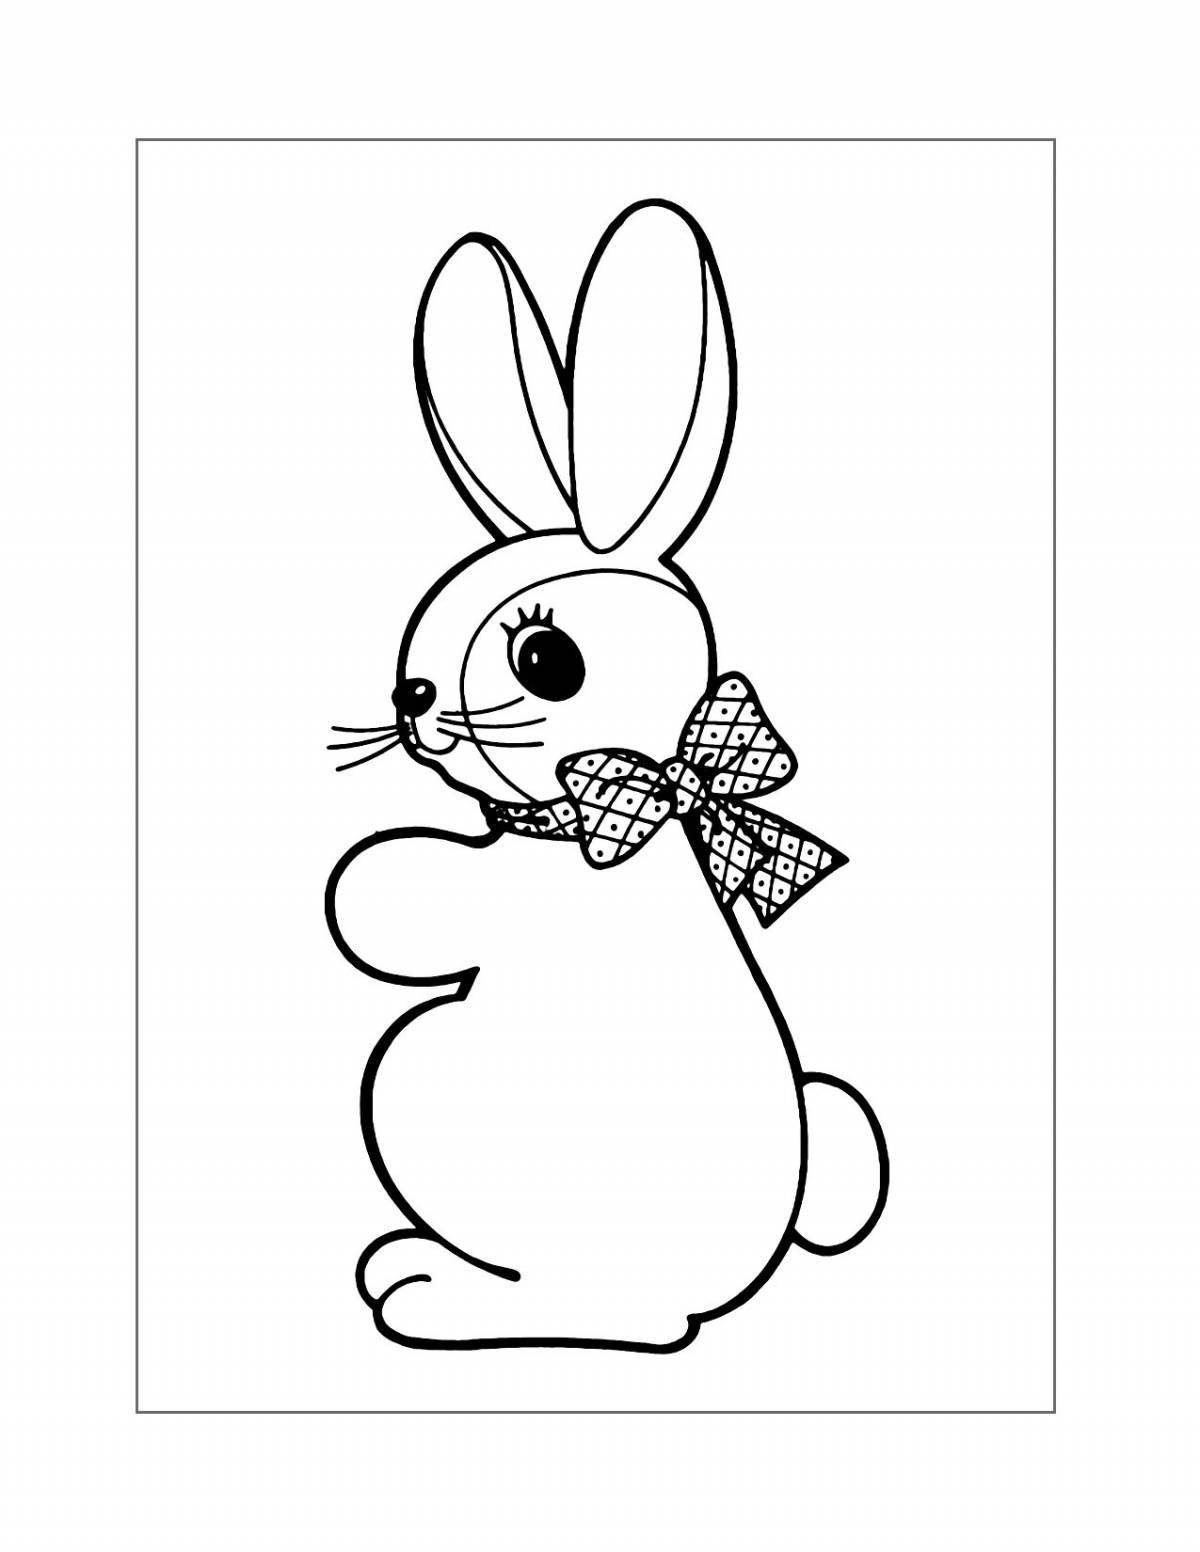 Funny coloring rabbit with a bow